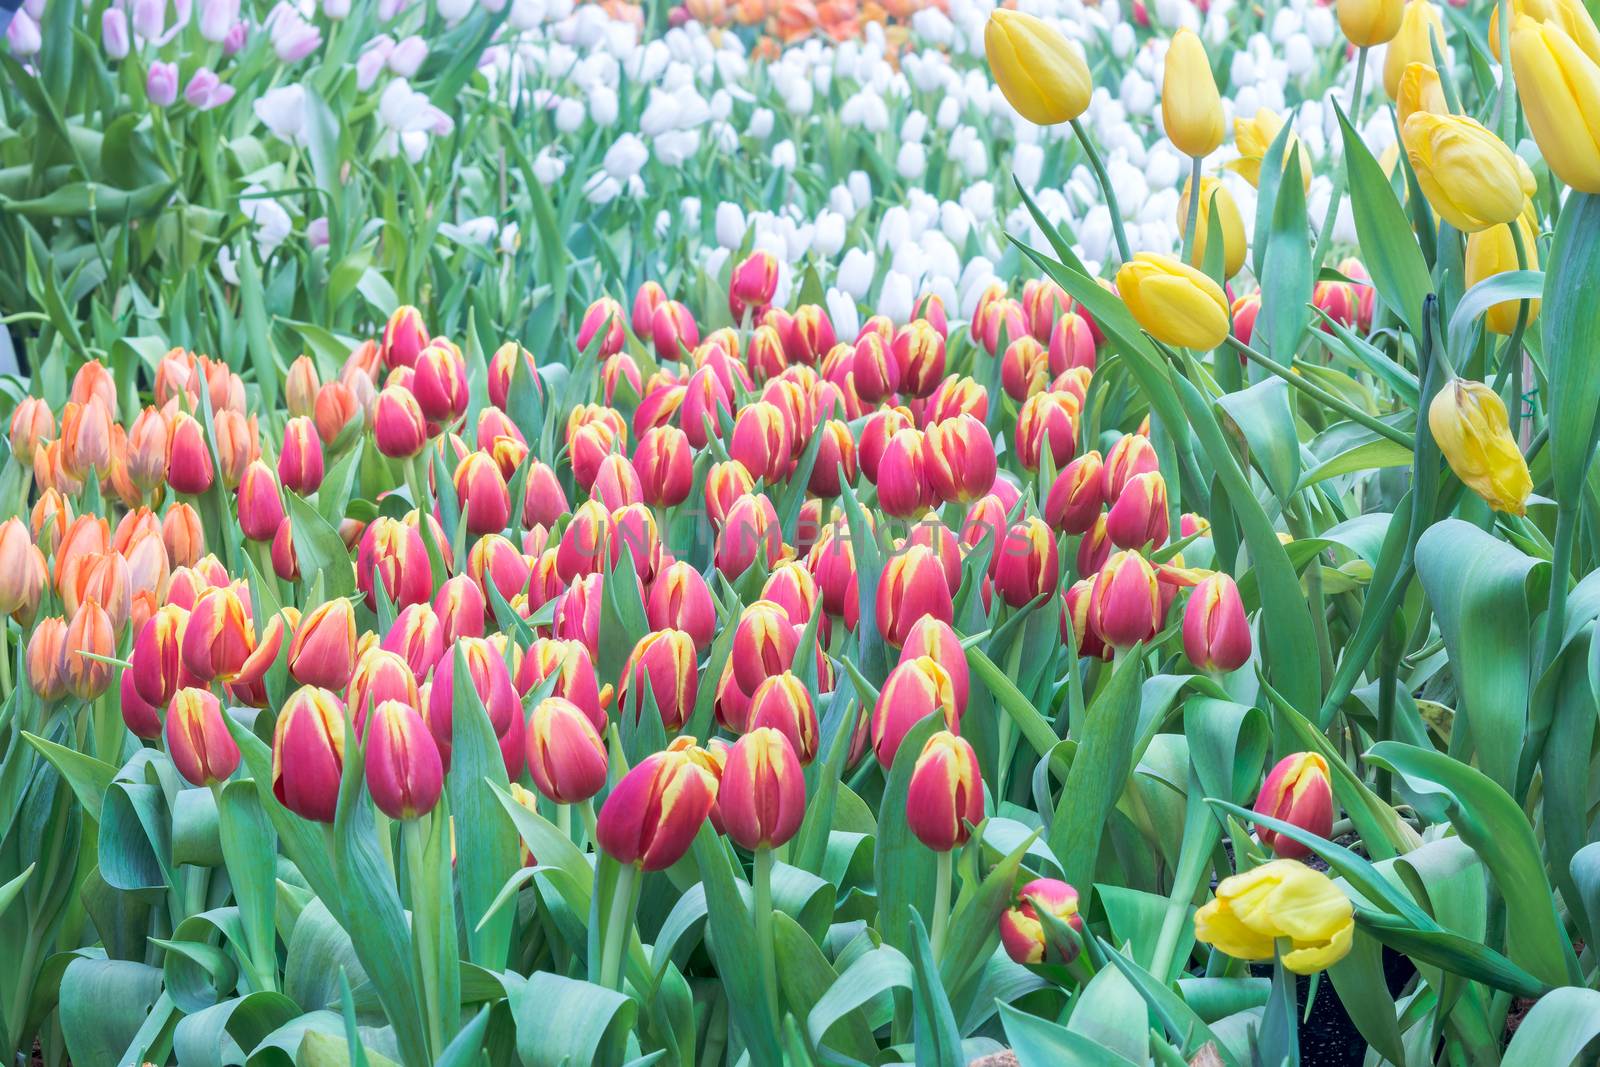 Colorful tulip flowers blooming in filed plantation